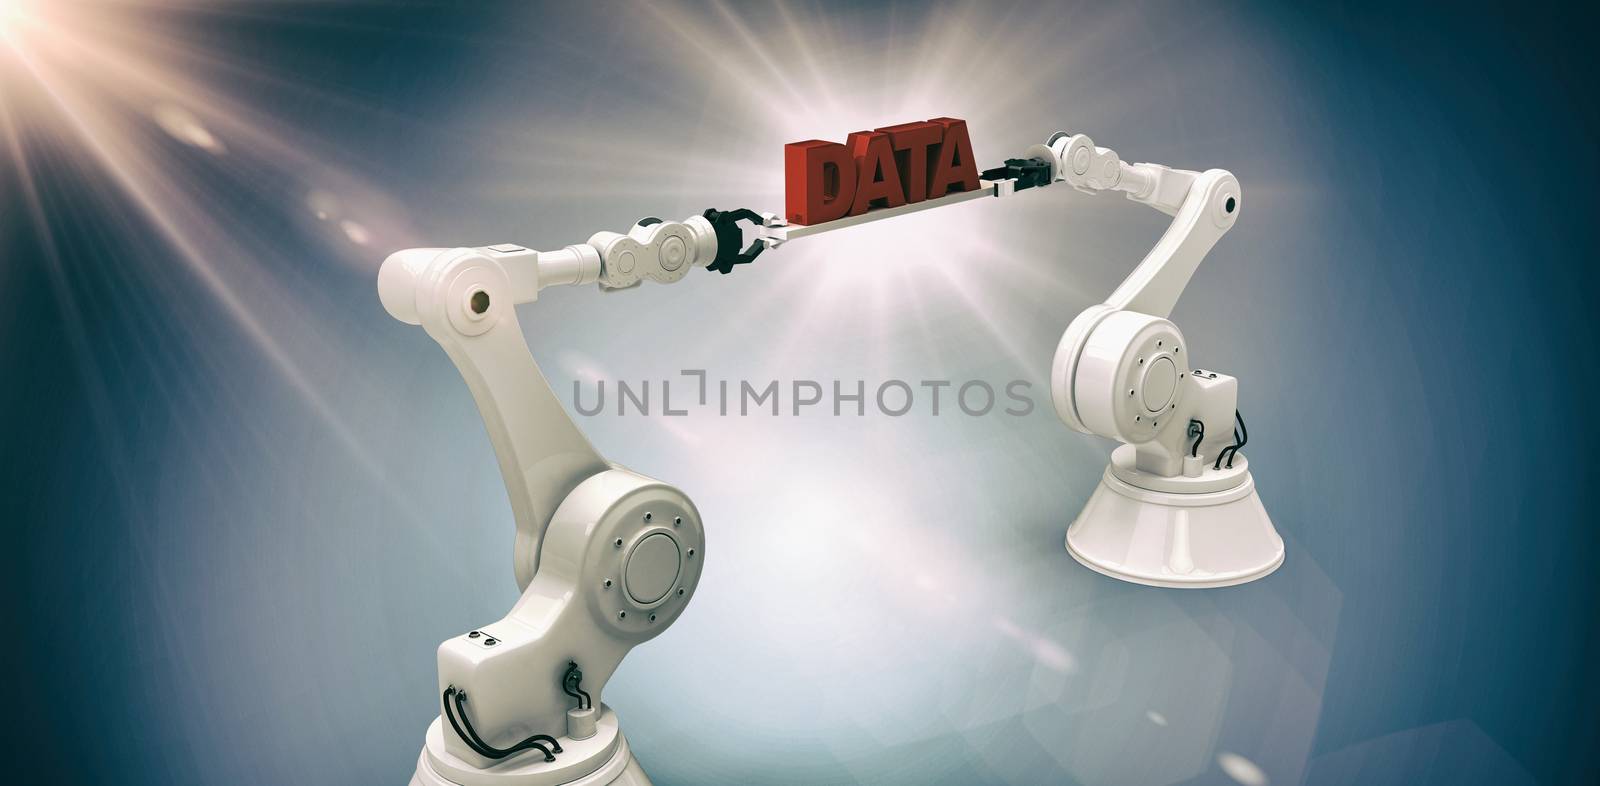 Composite image of white robotic hands holding red data message against dark background by Wavebreakmedia